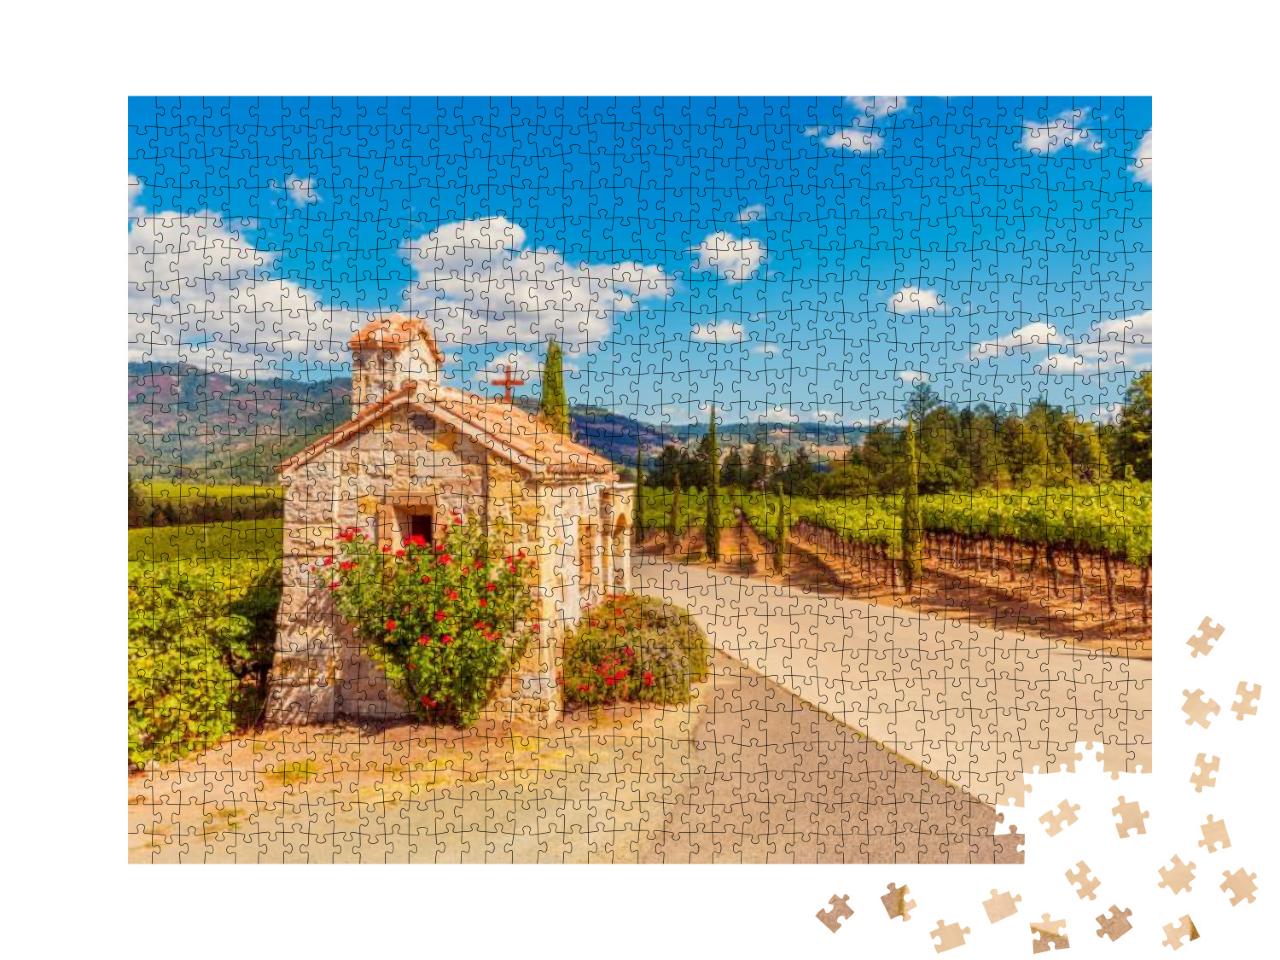 Chapel Near Vineyards in Napa Valley California Usa... Jigsaw Puzzle with 1000 pieces